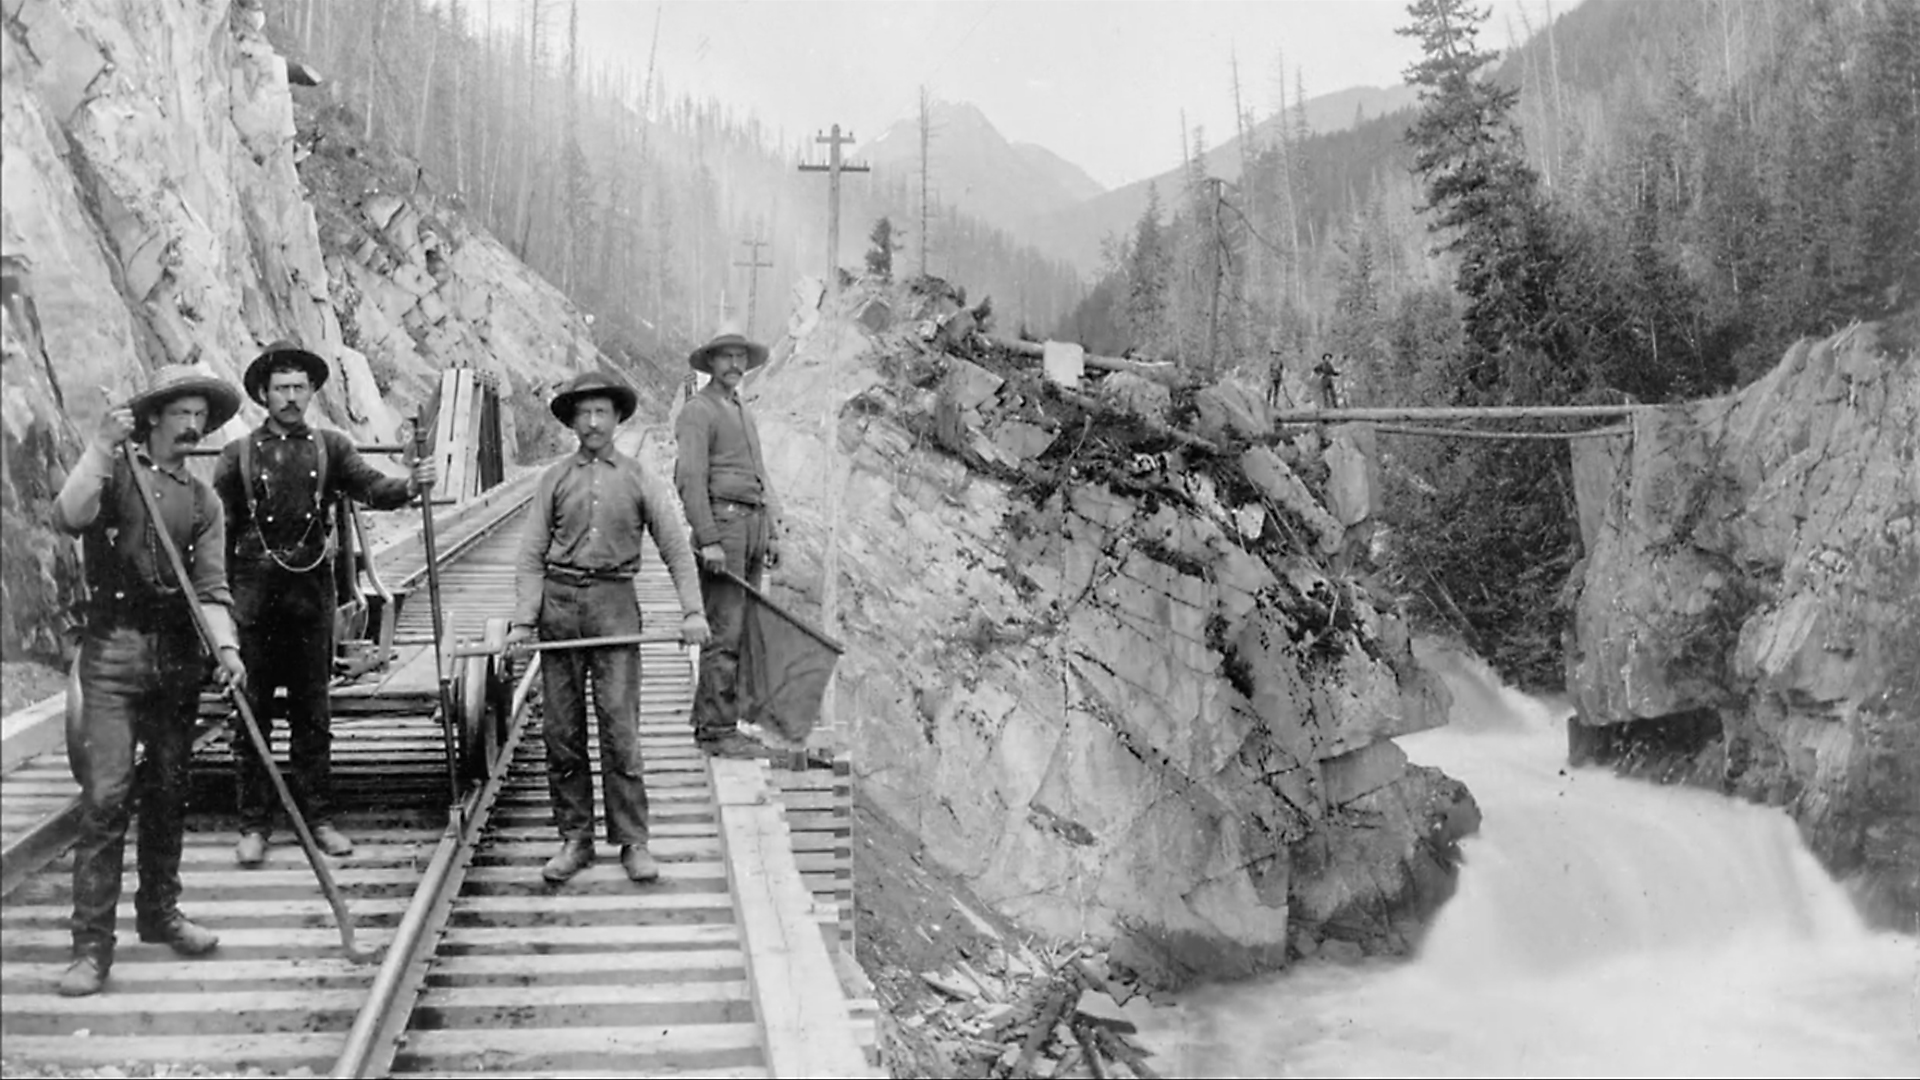 Working People: A History of Labour in British Columbia - E12 - Where the Fraser River Flows